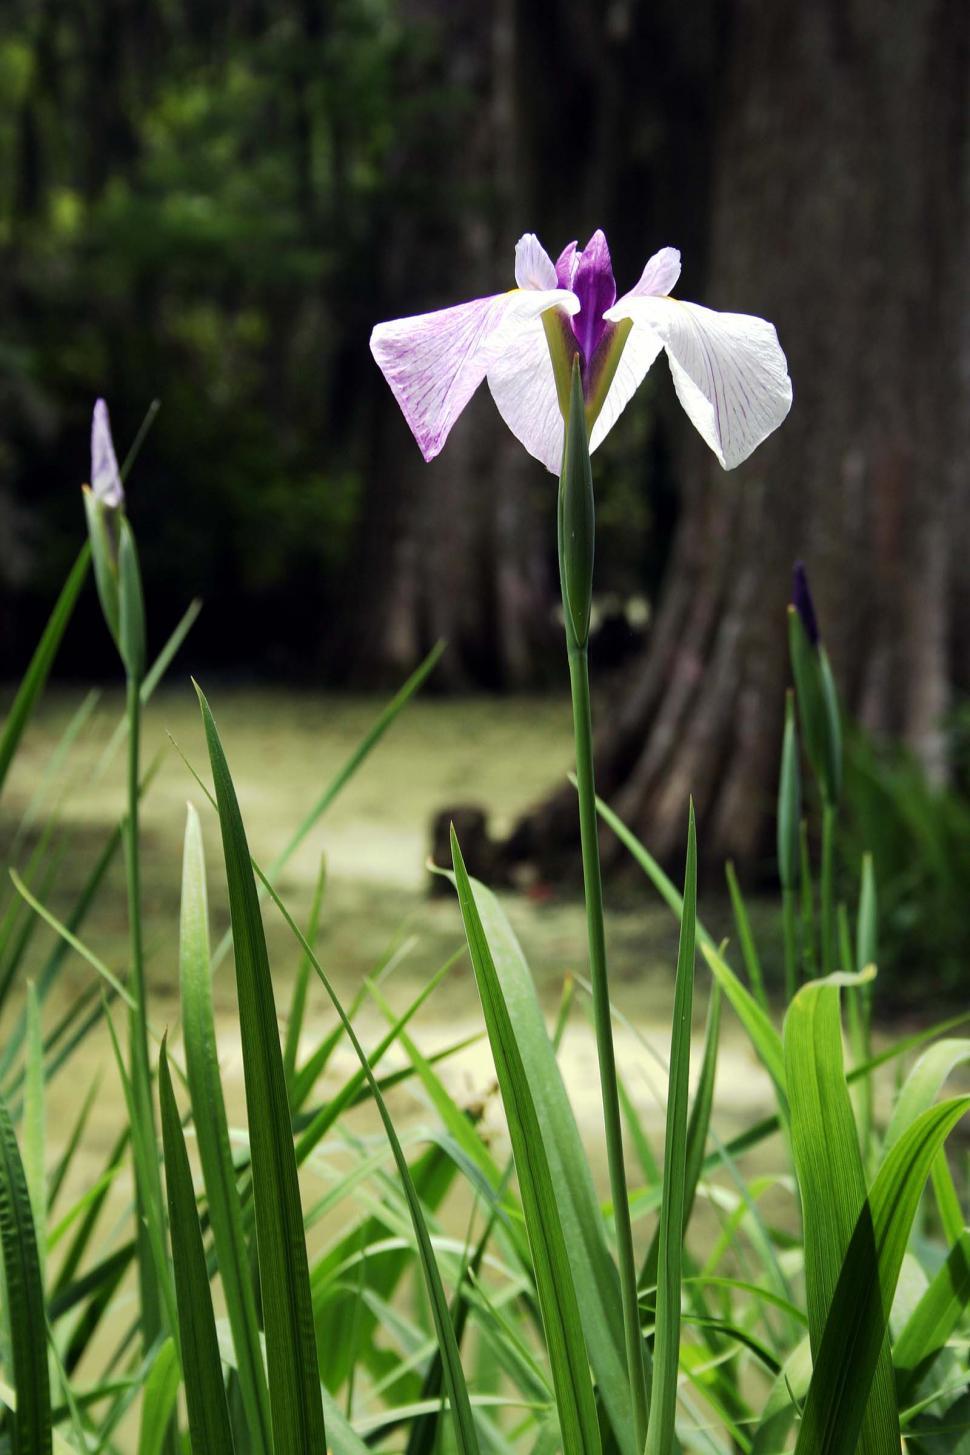 Free Image of Purple and White Flower in Grassy Area 